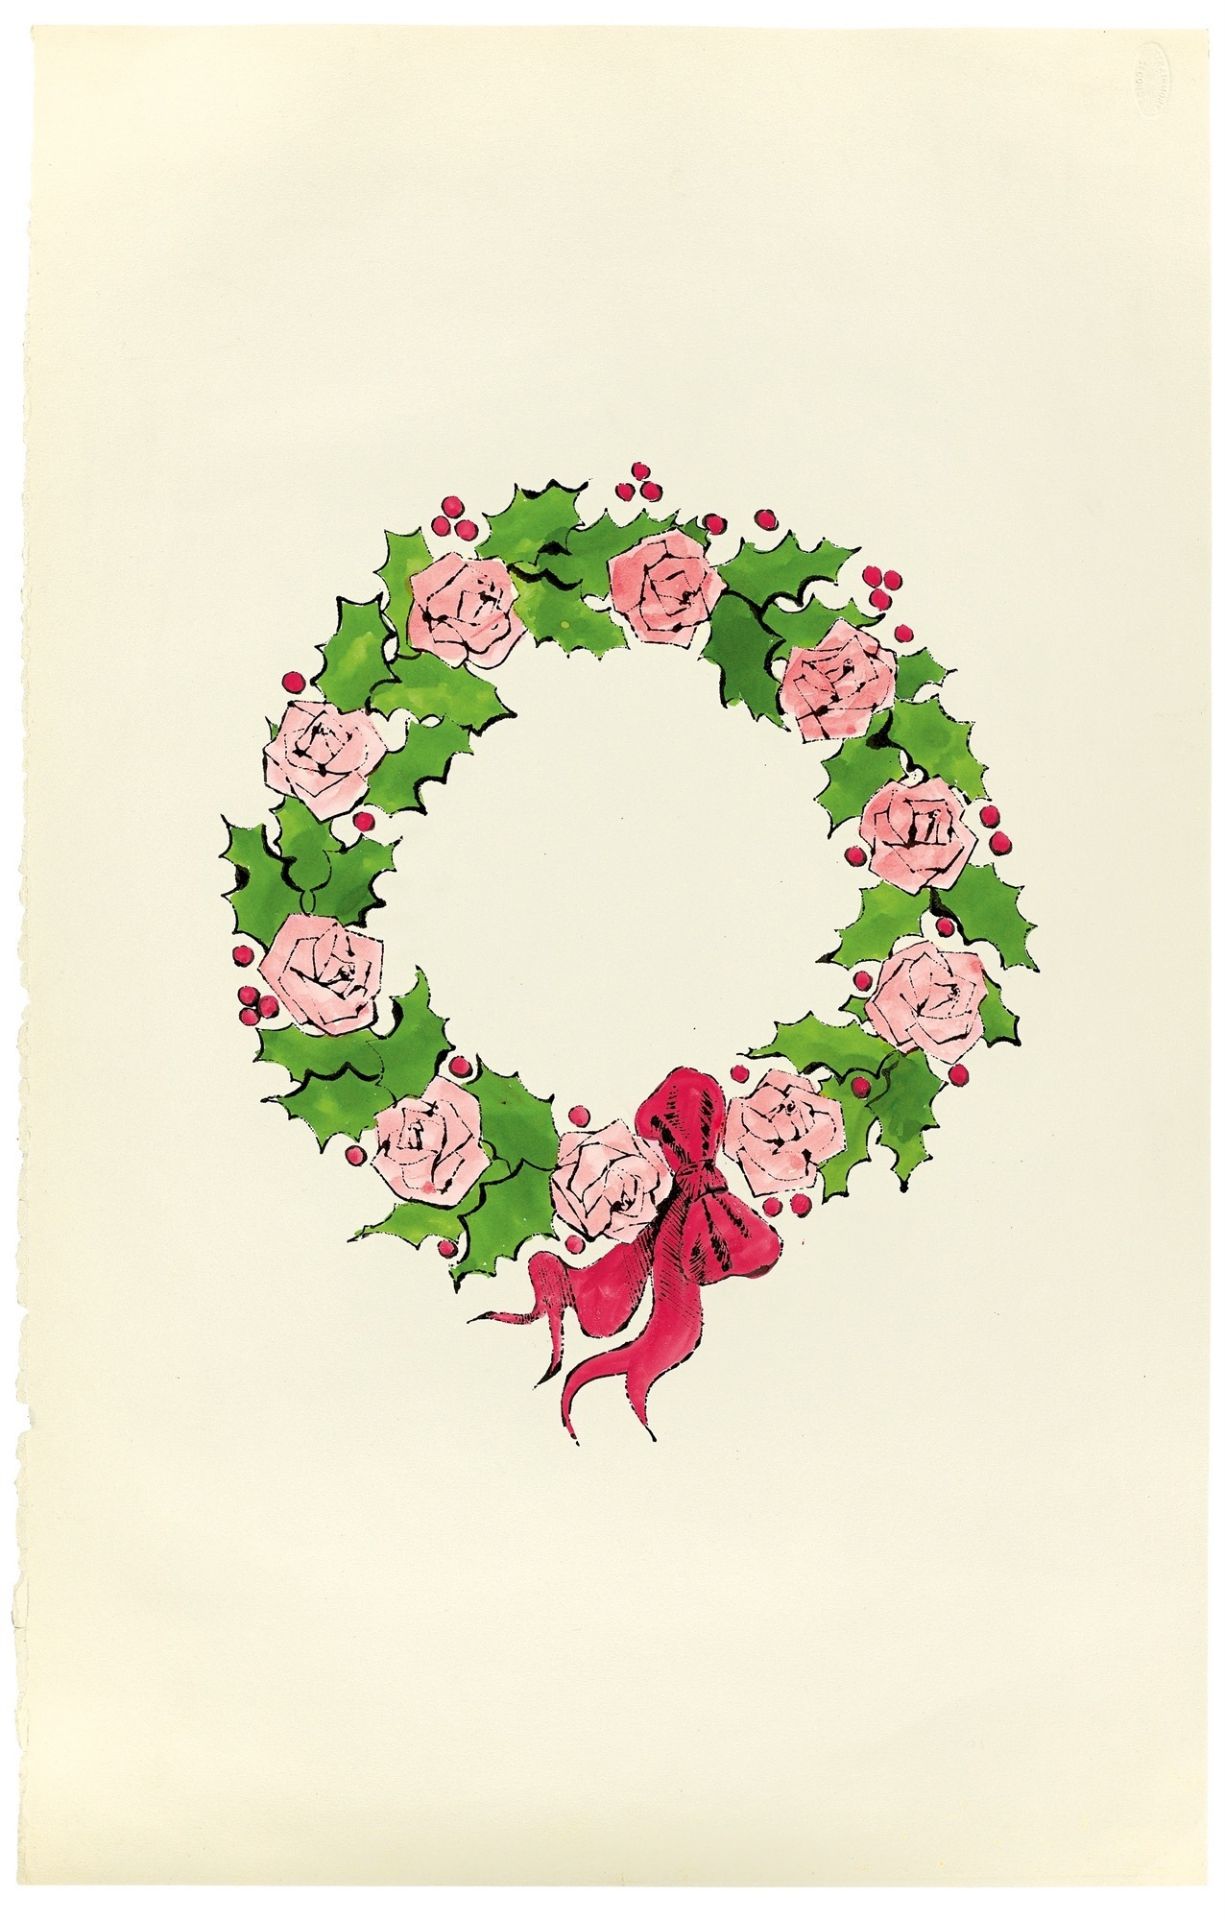 Andy Warhol. Christmas-Wreath with Roses. 1956